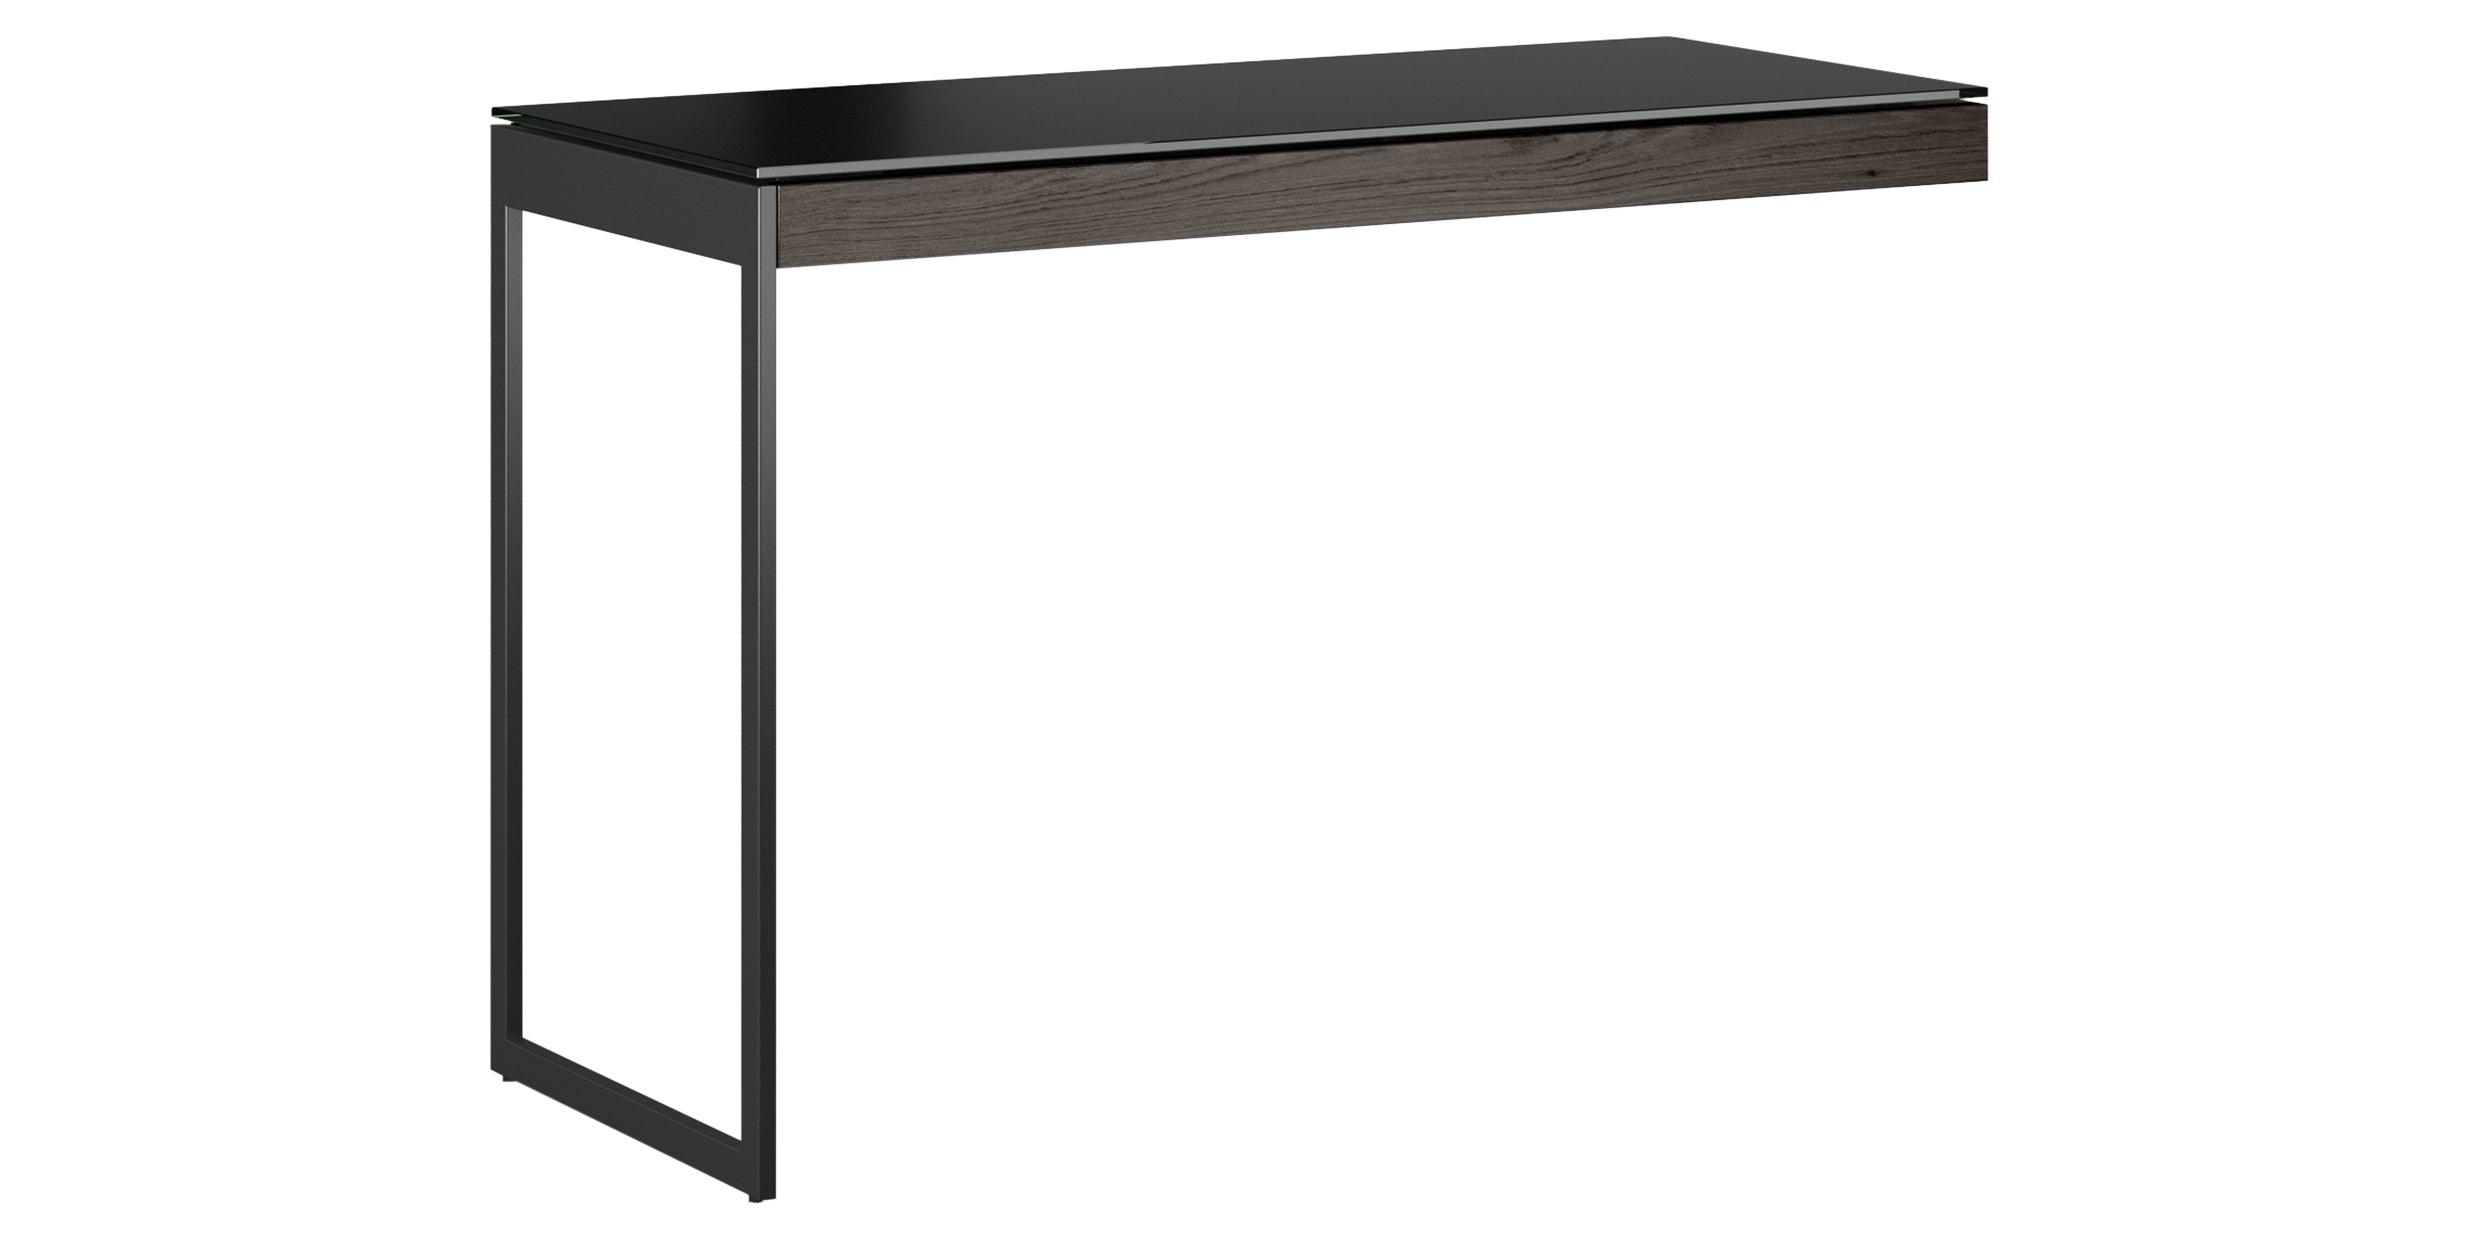 Charcoal Ash Veneer and Black Satin-Etched Glass with Black Steel | BDI Sequel Desk Return | Valley Ridge Furniture